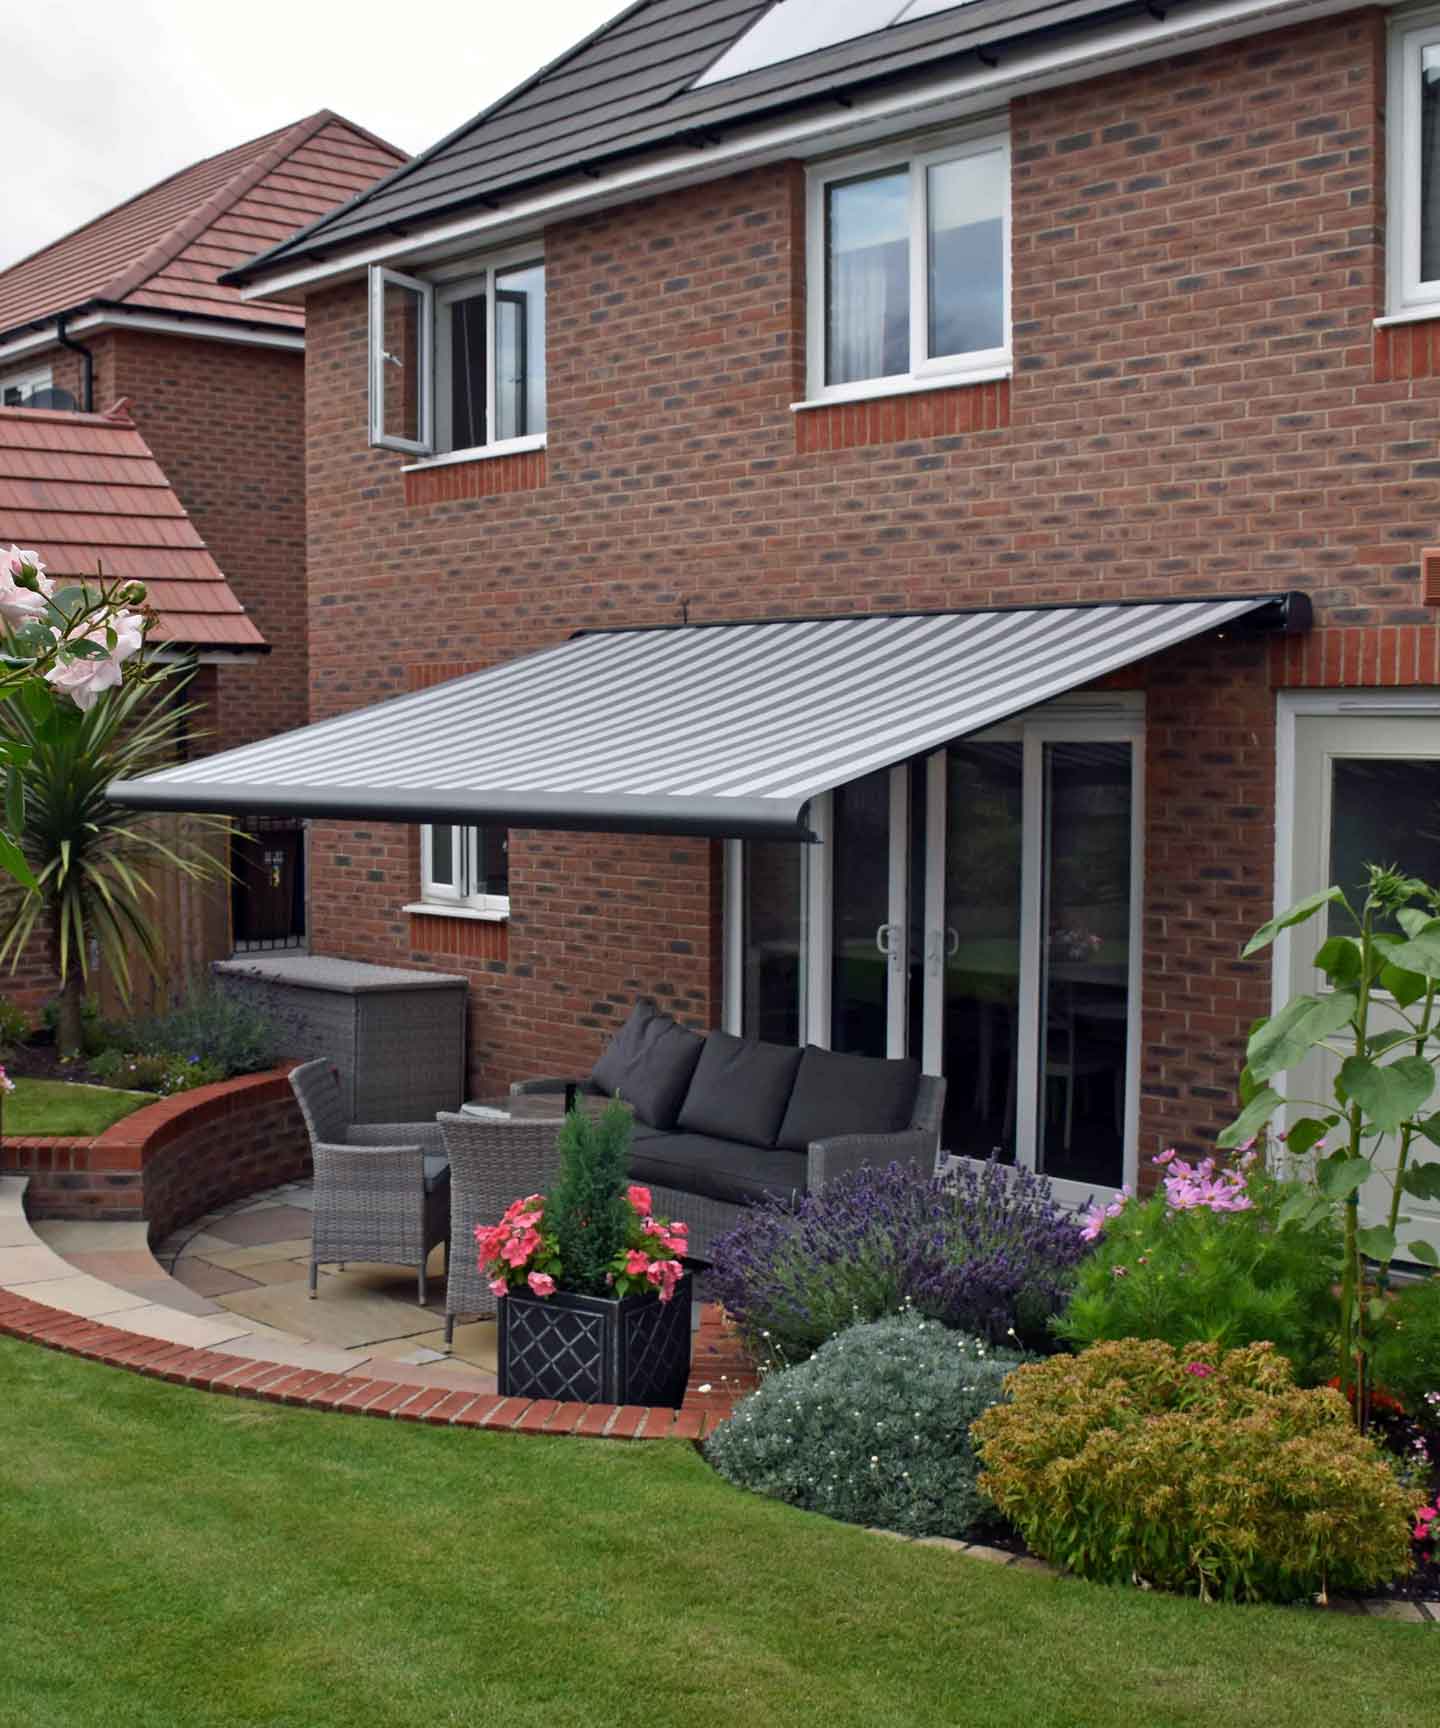 A high quality awning covering a sunny patio area